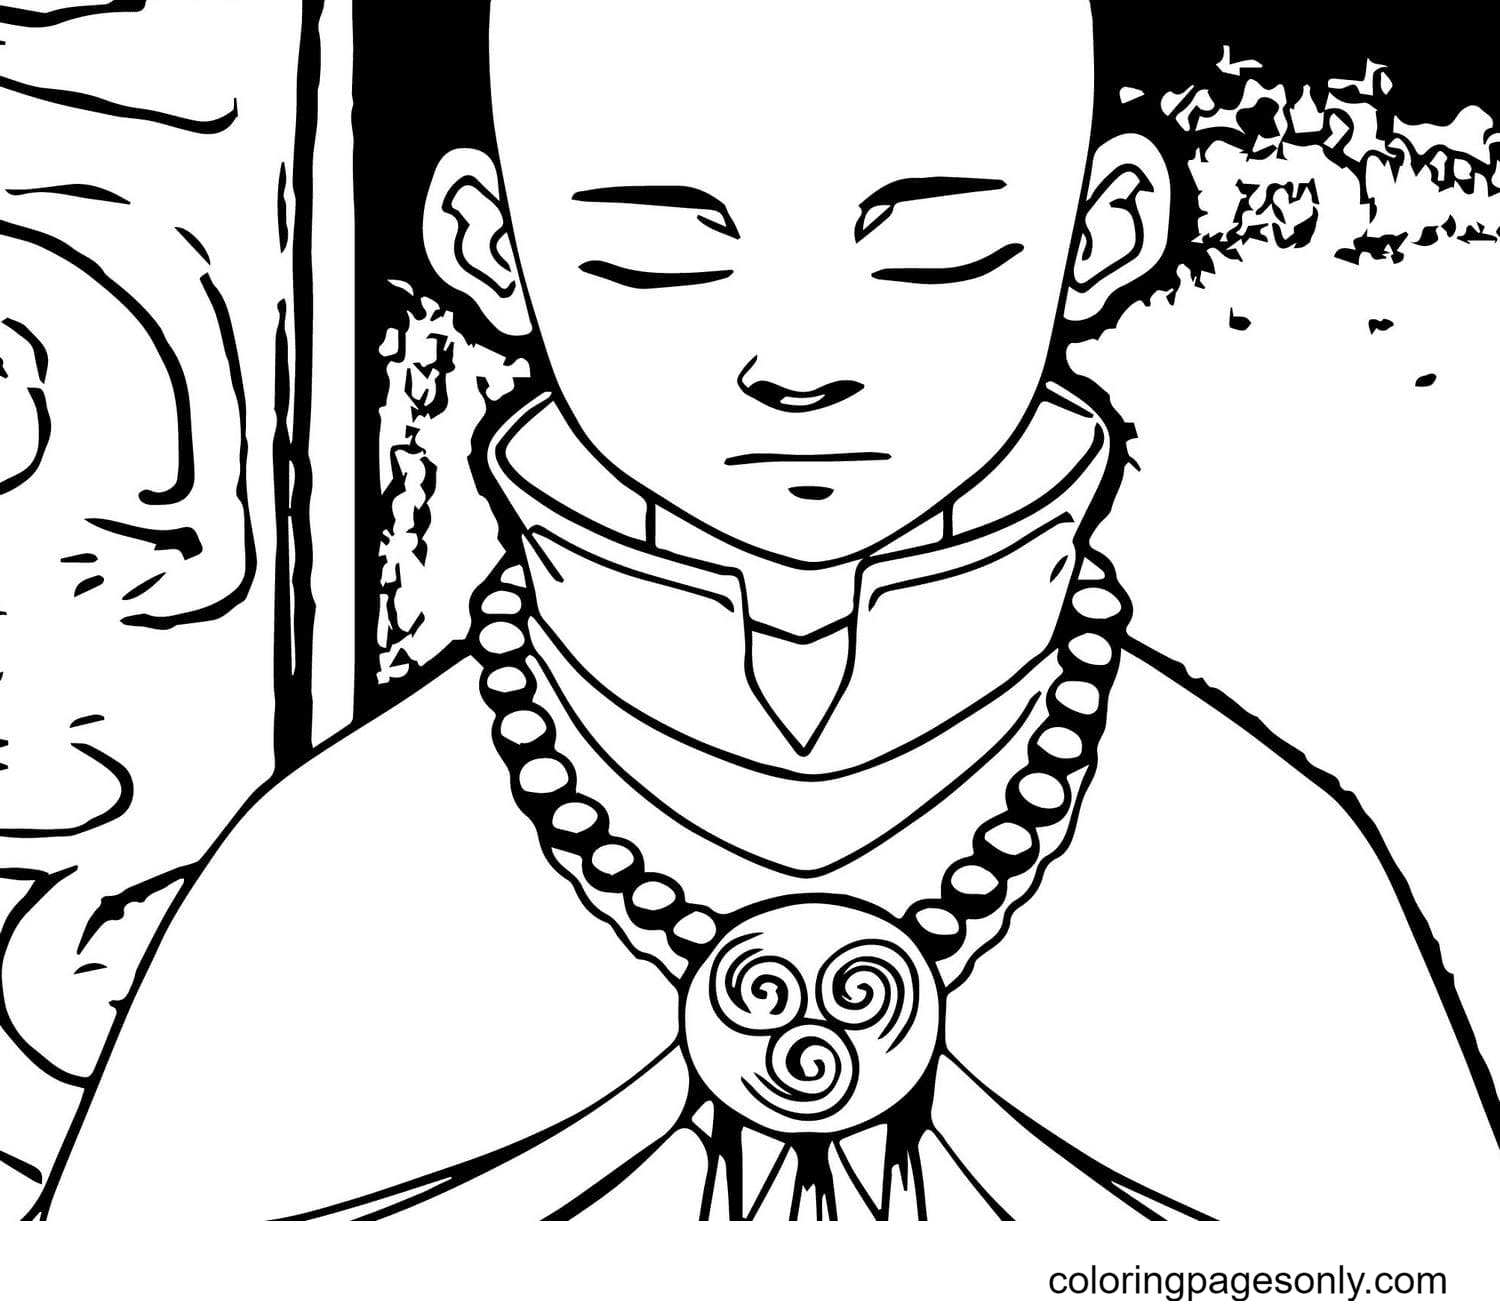 Calm Aang Coloring Page